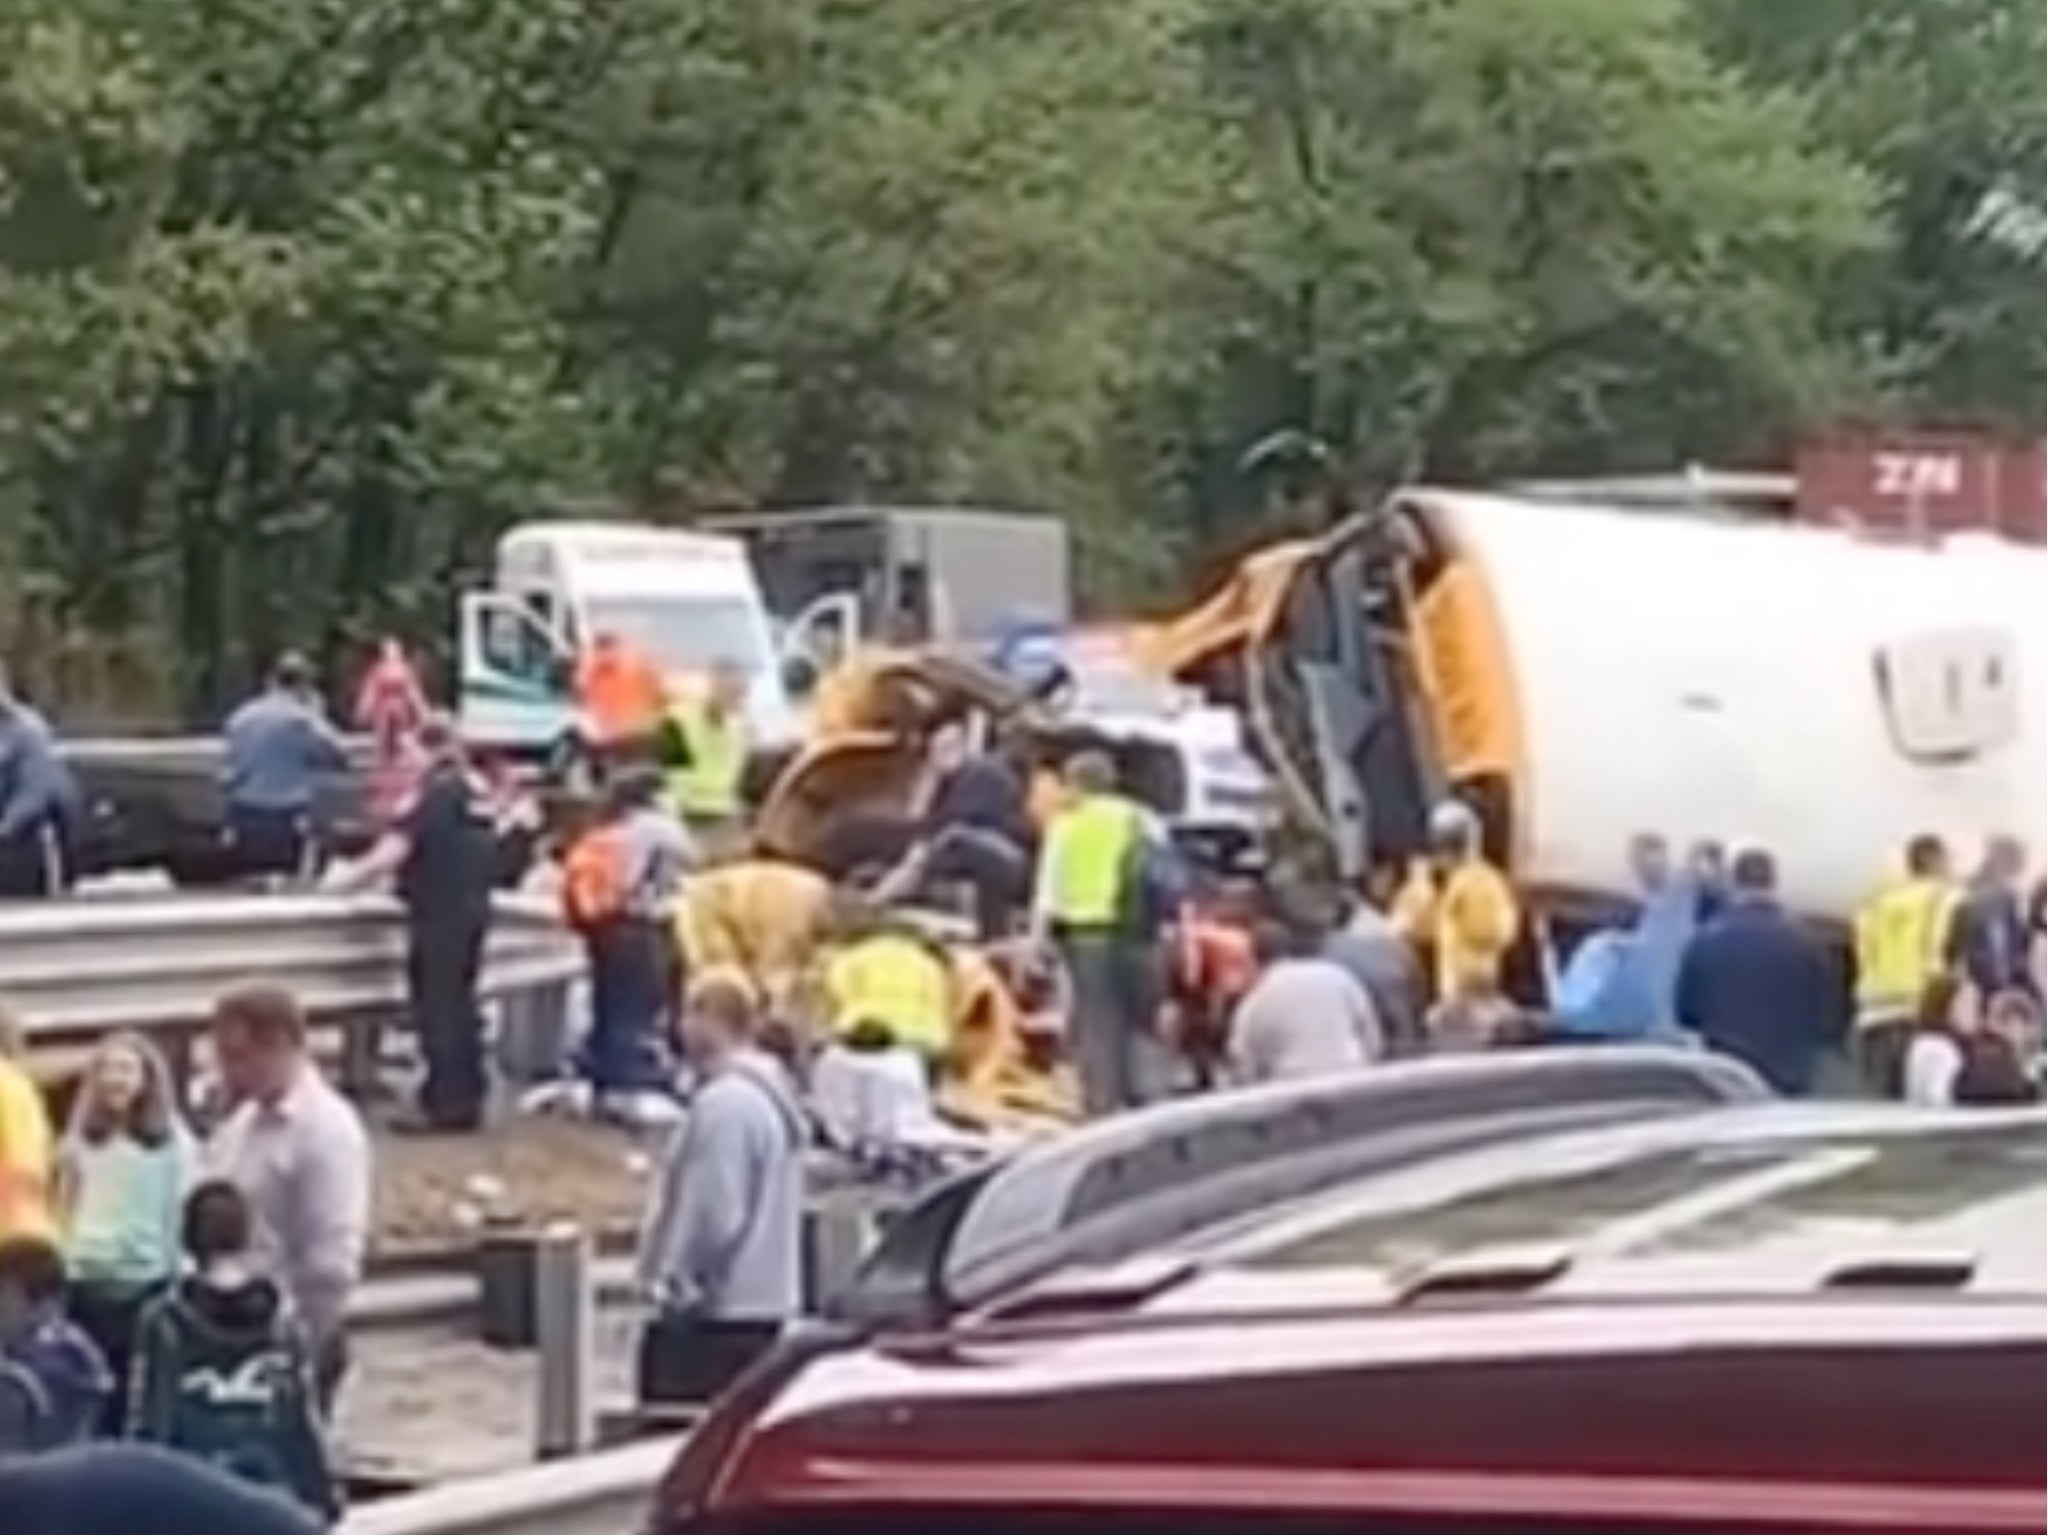 New Jersey bus crash: Two dead and 43 injured after school vehicle collides with dump truck